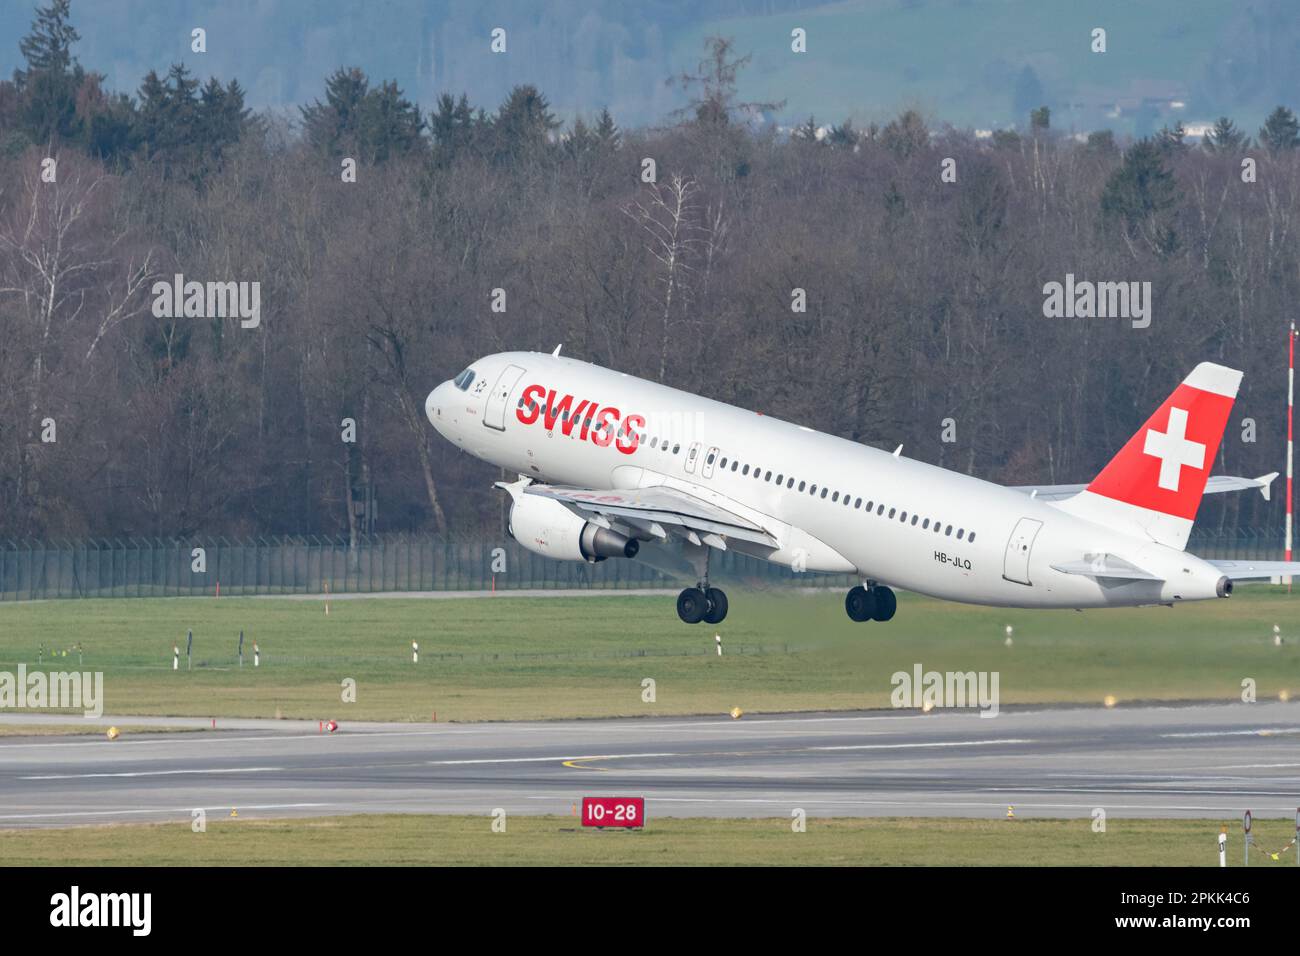 Zurich, Switzerland, January 2, 2023 Swiss international airlines Airbus A320-214 aircraft takeoff from runway 28 Stock Photo